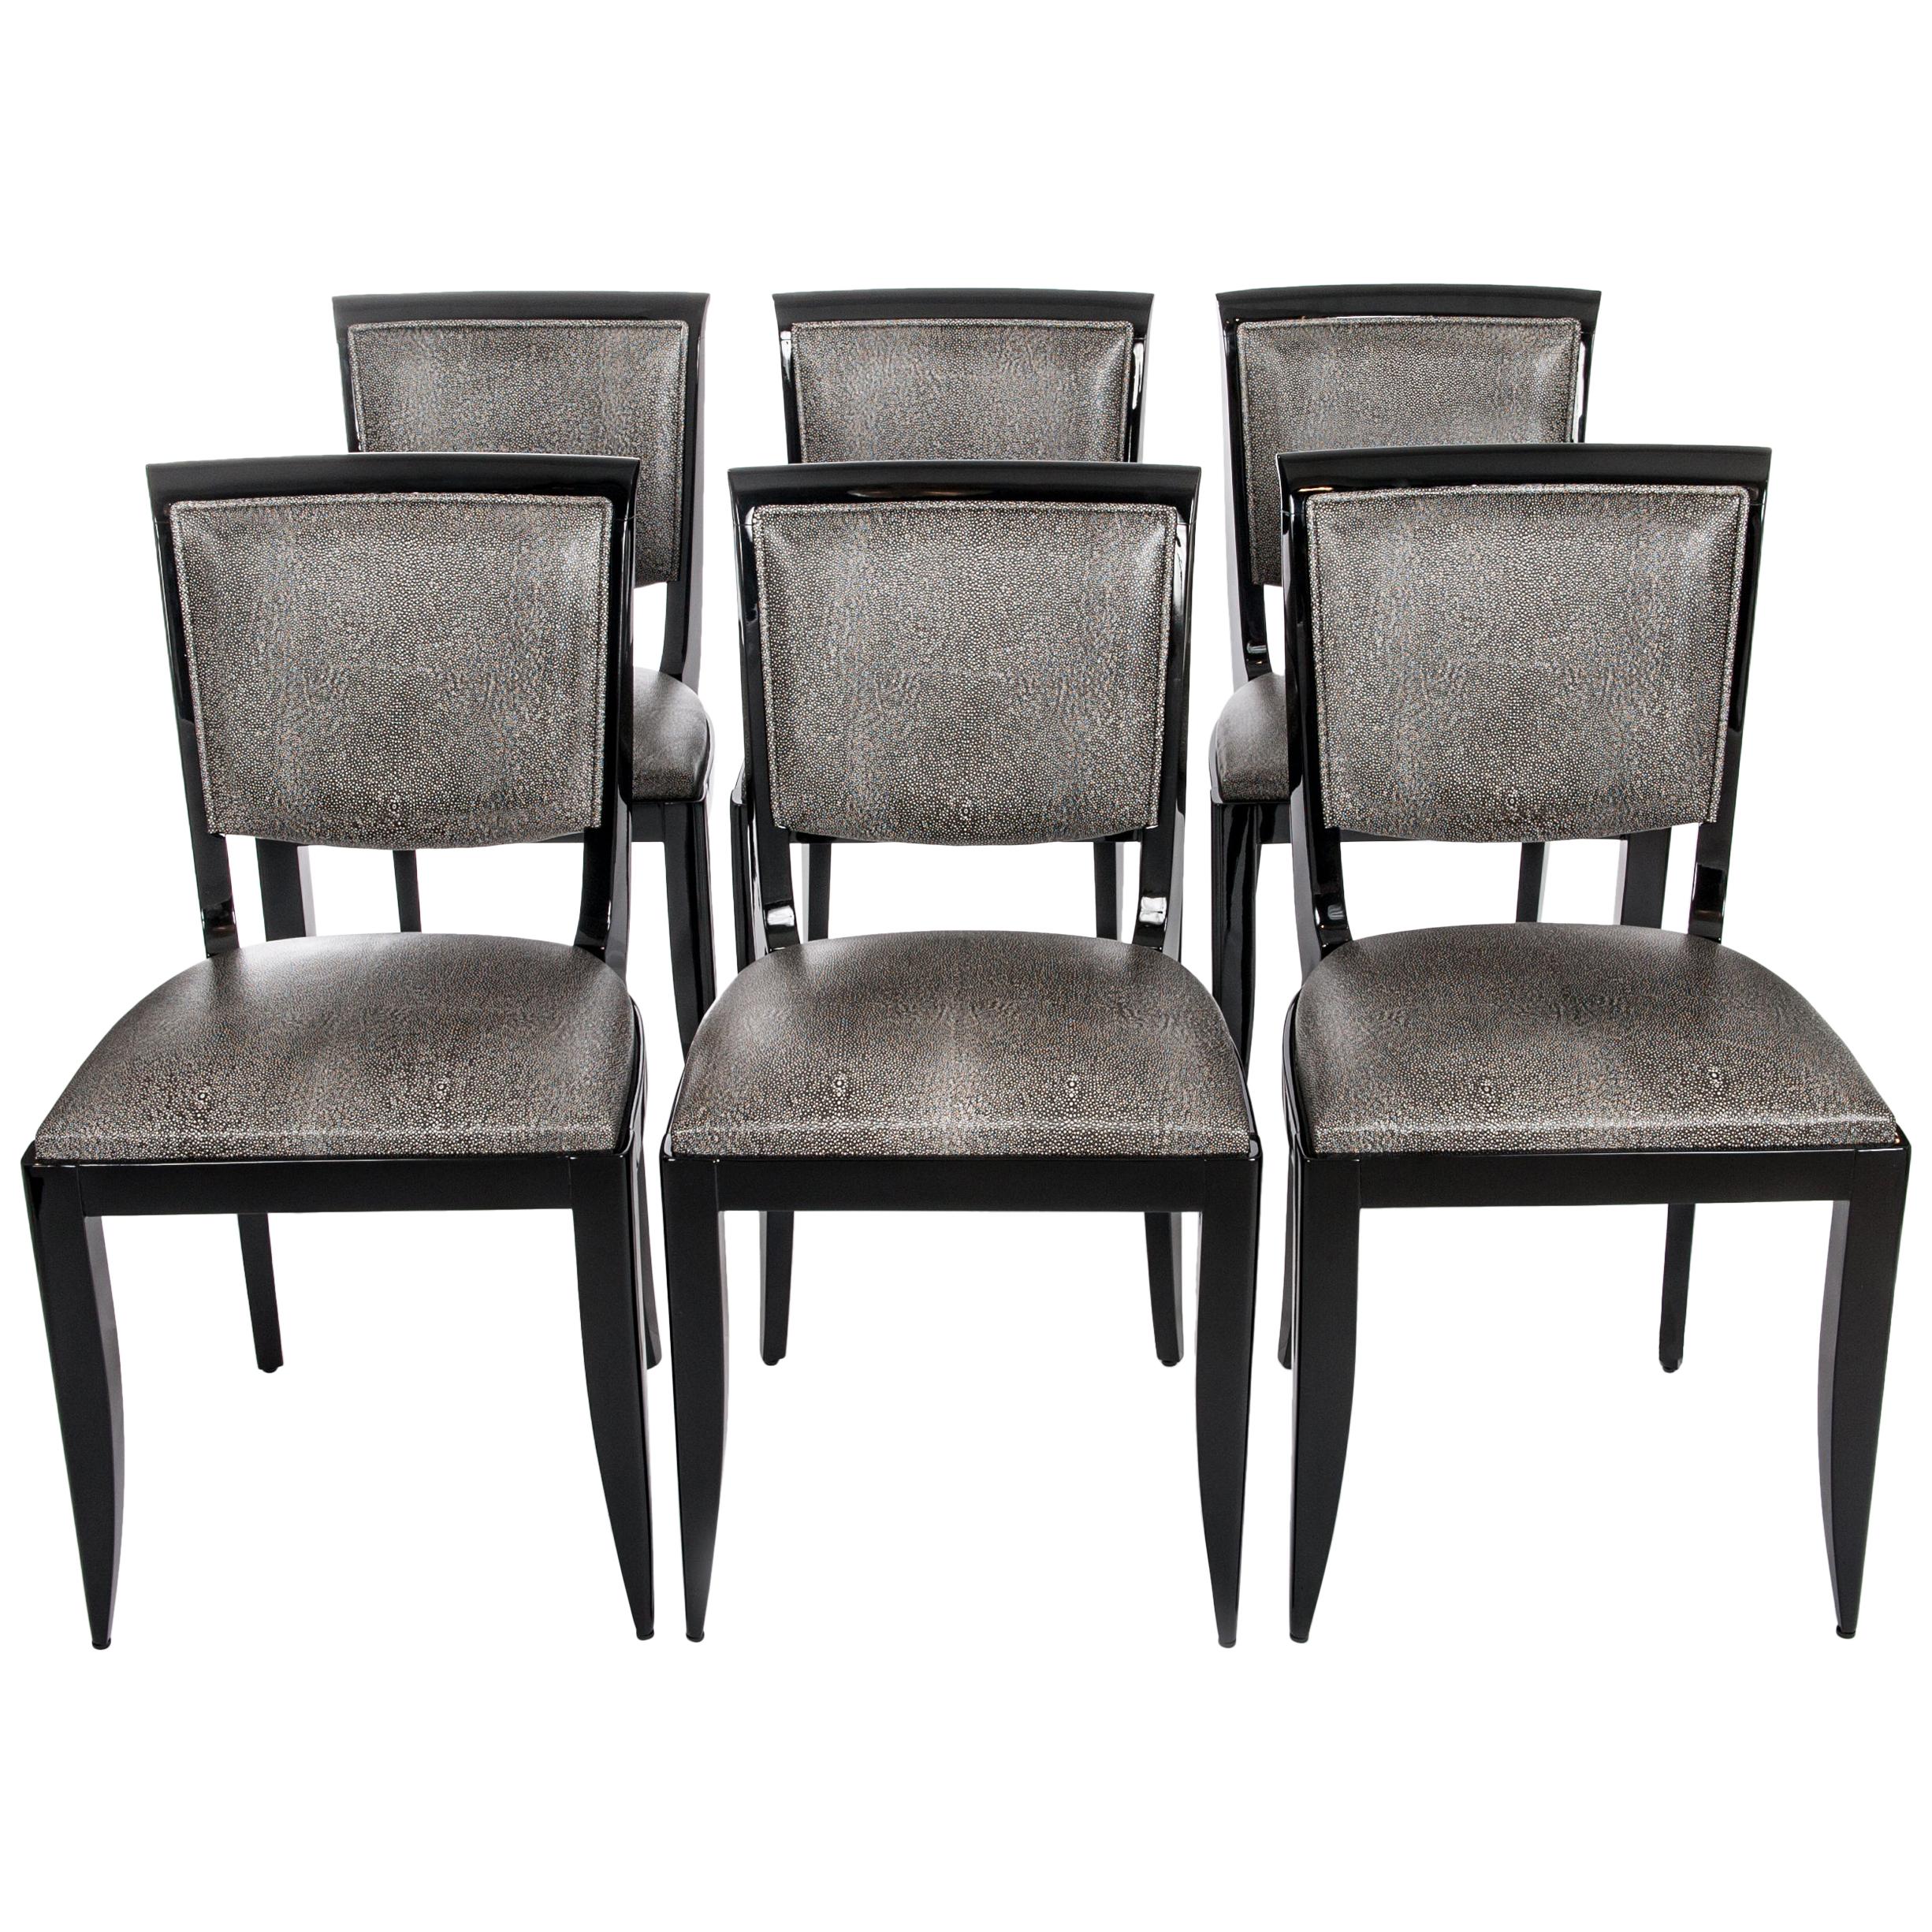 Dining Room Chairs Black, Black And White Leather Dining Room Chair With Arms